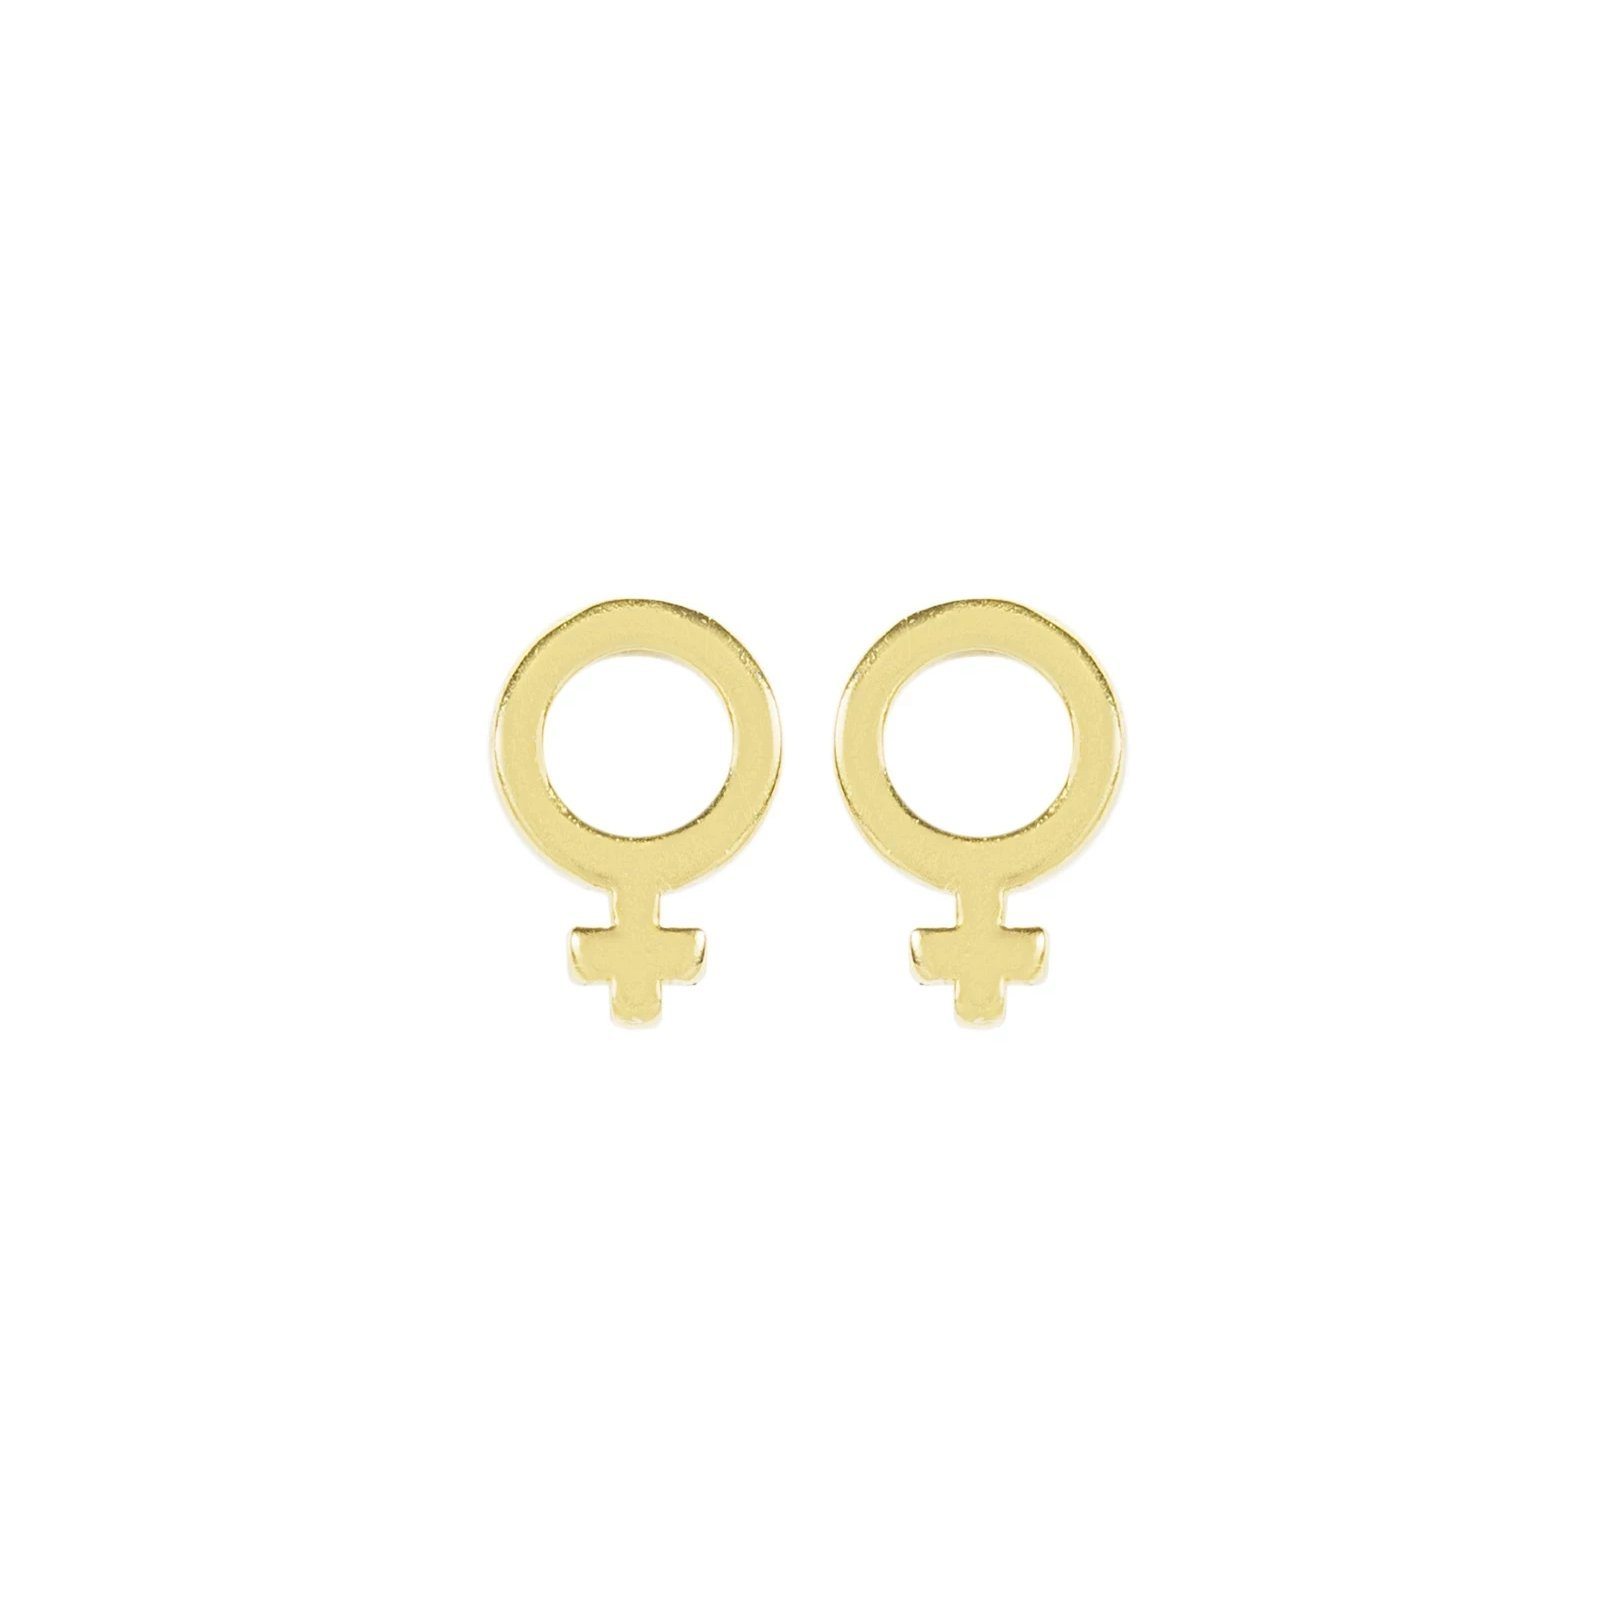 Wear it loud and proud! The Female Symbol Studs were inspired by all the support and help that Katie has received from the leading ladies in her life. When you wear these studs, we hope you feel empowered and ready to be the lady boss that you are. Handmade in California by Katie Dean Jewelry.